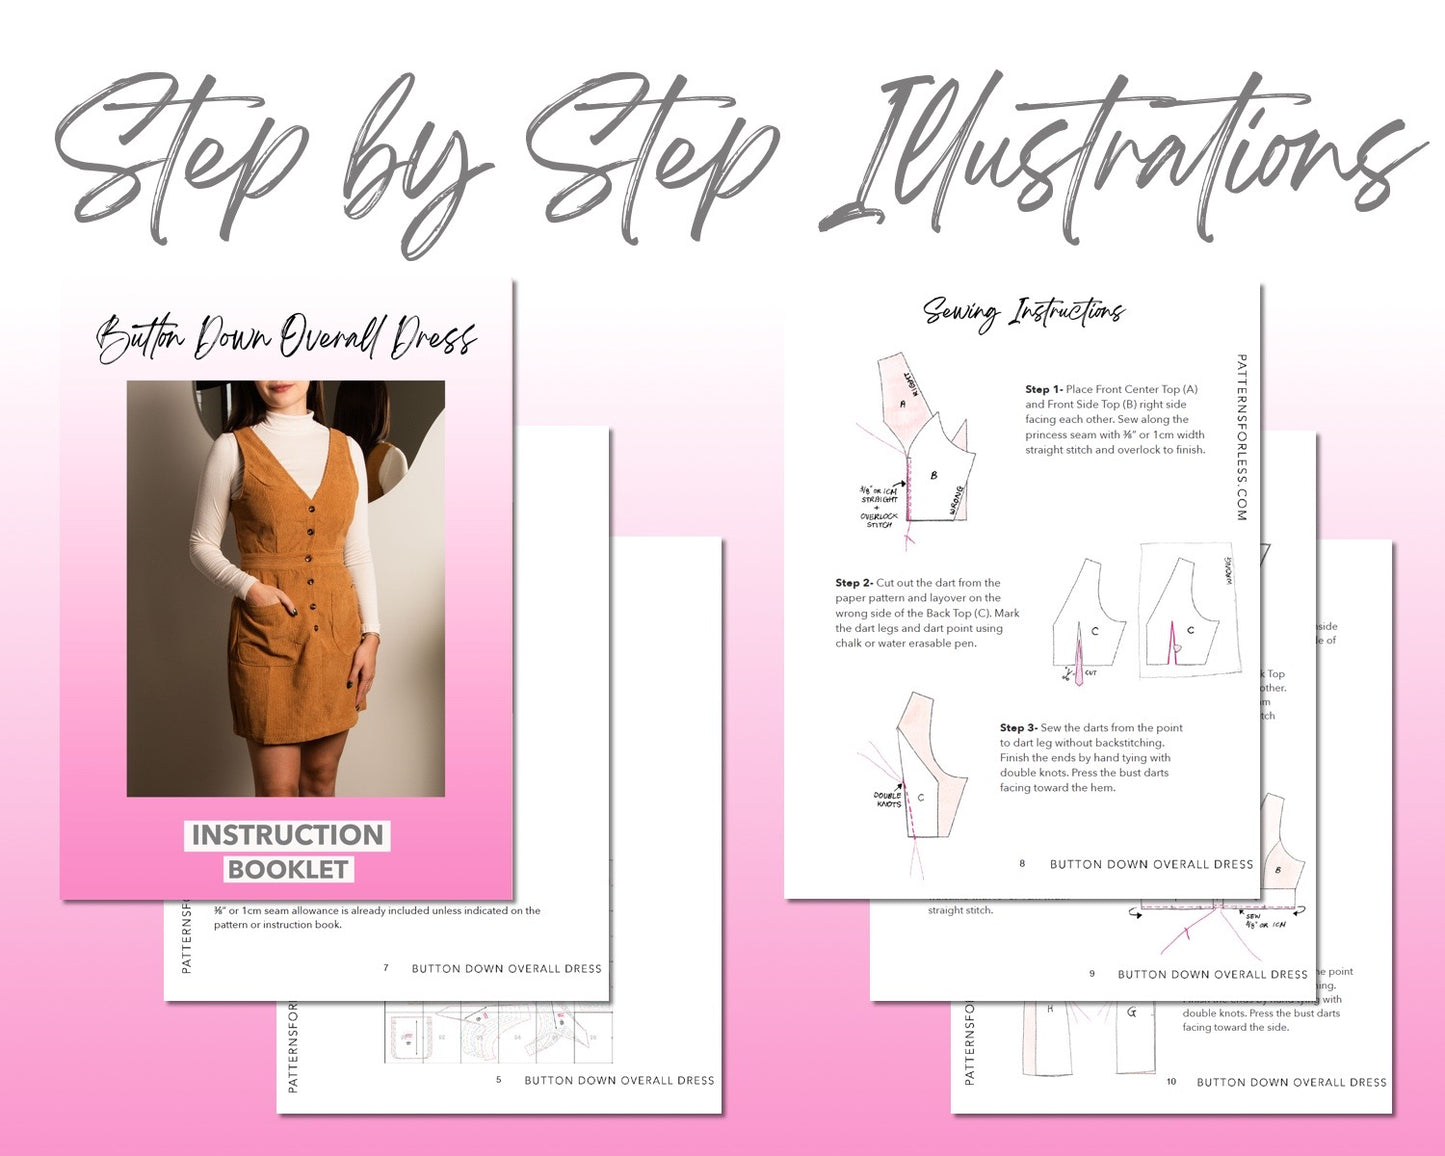 Button Down Overall Dress sewing pattern step by step illustrations.